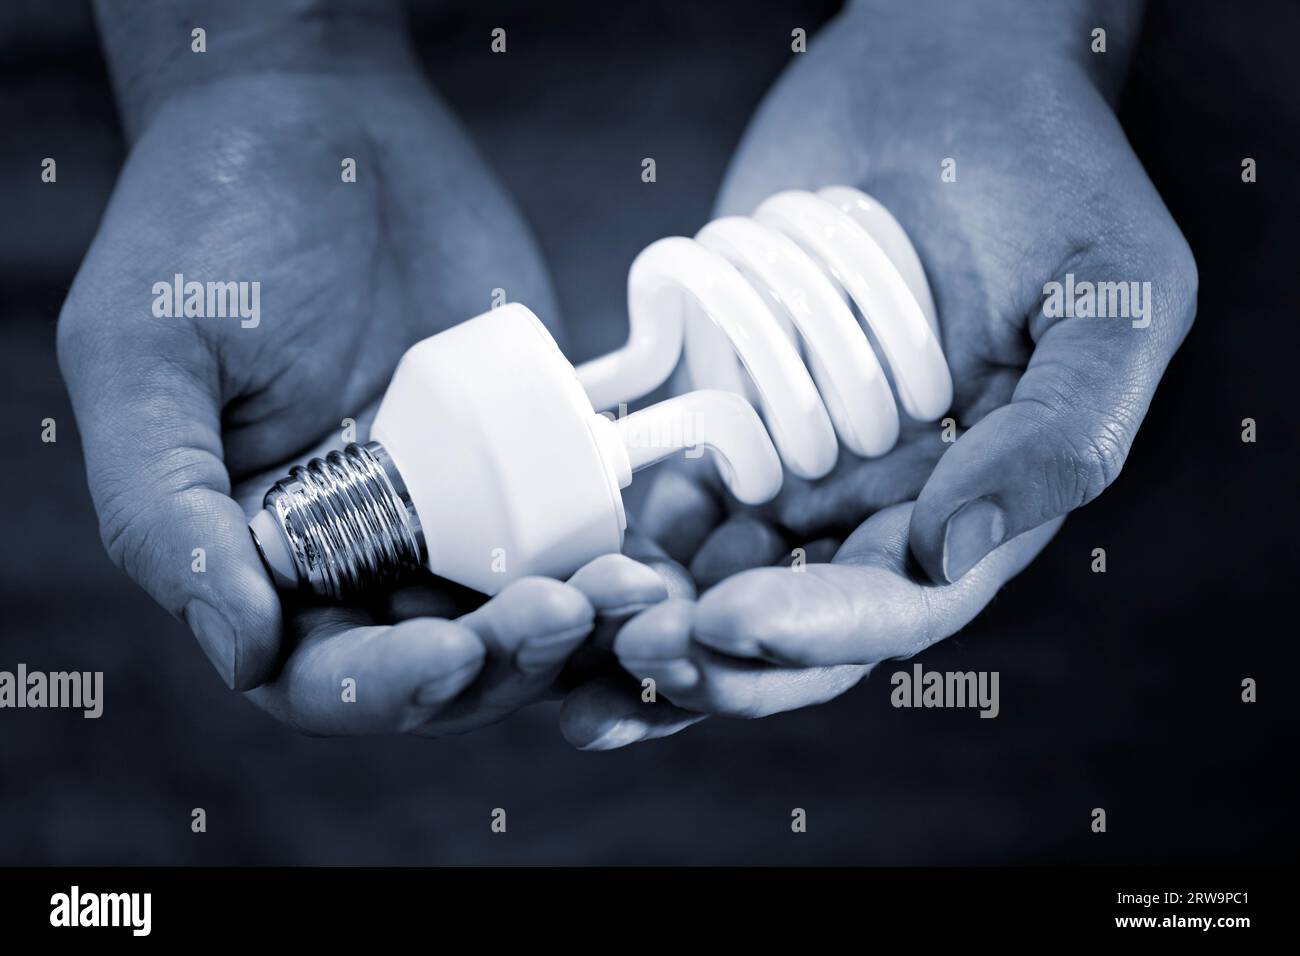 Blue toned monochrome image of hands holding a compact fluorescent bulb. Very short depth-of-field Stock Photo